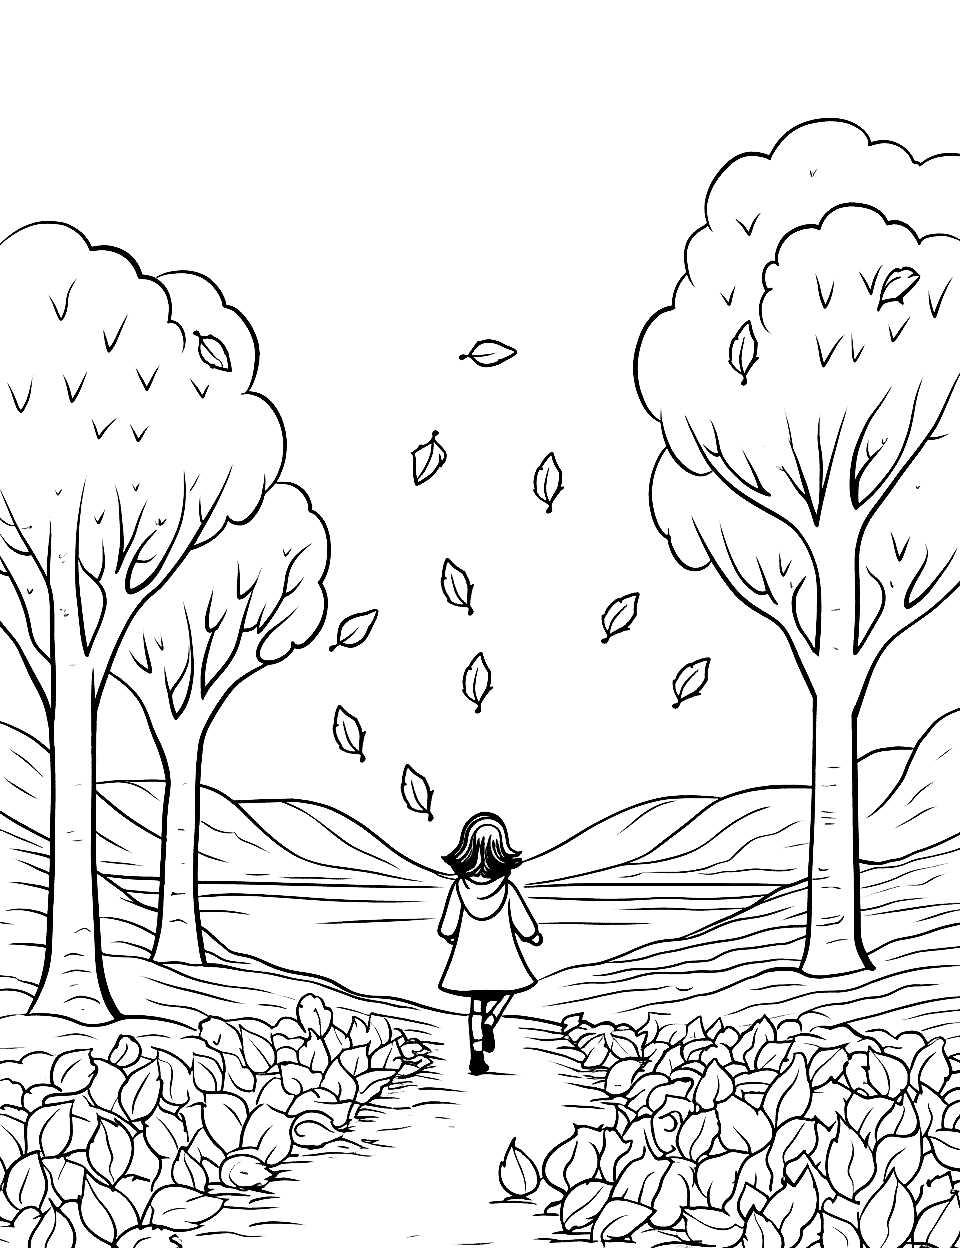 Autumn Leaves Falling Nature Coloring Page - A scene of autumn trees with leaves falling gently to the ground.